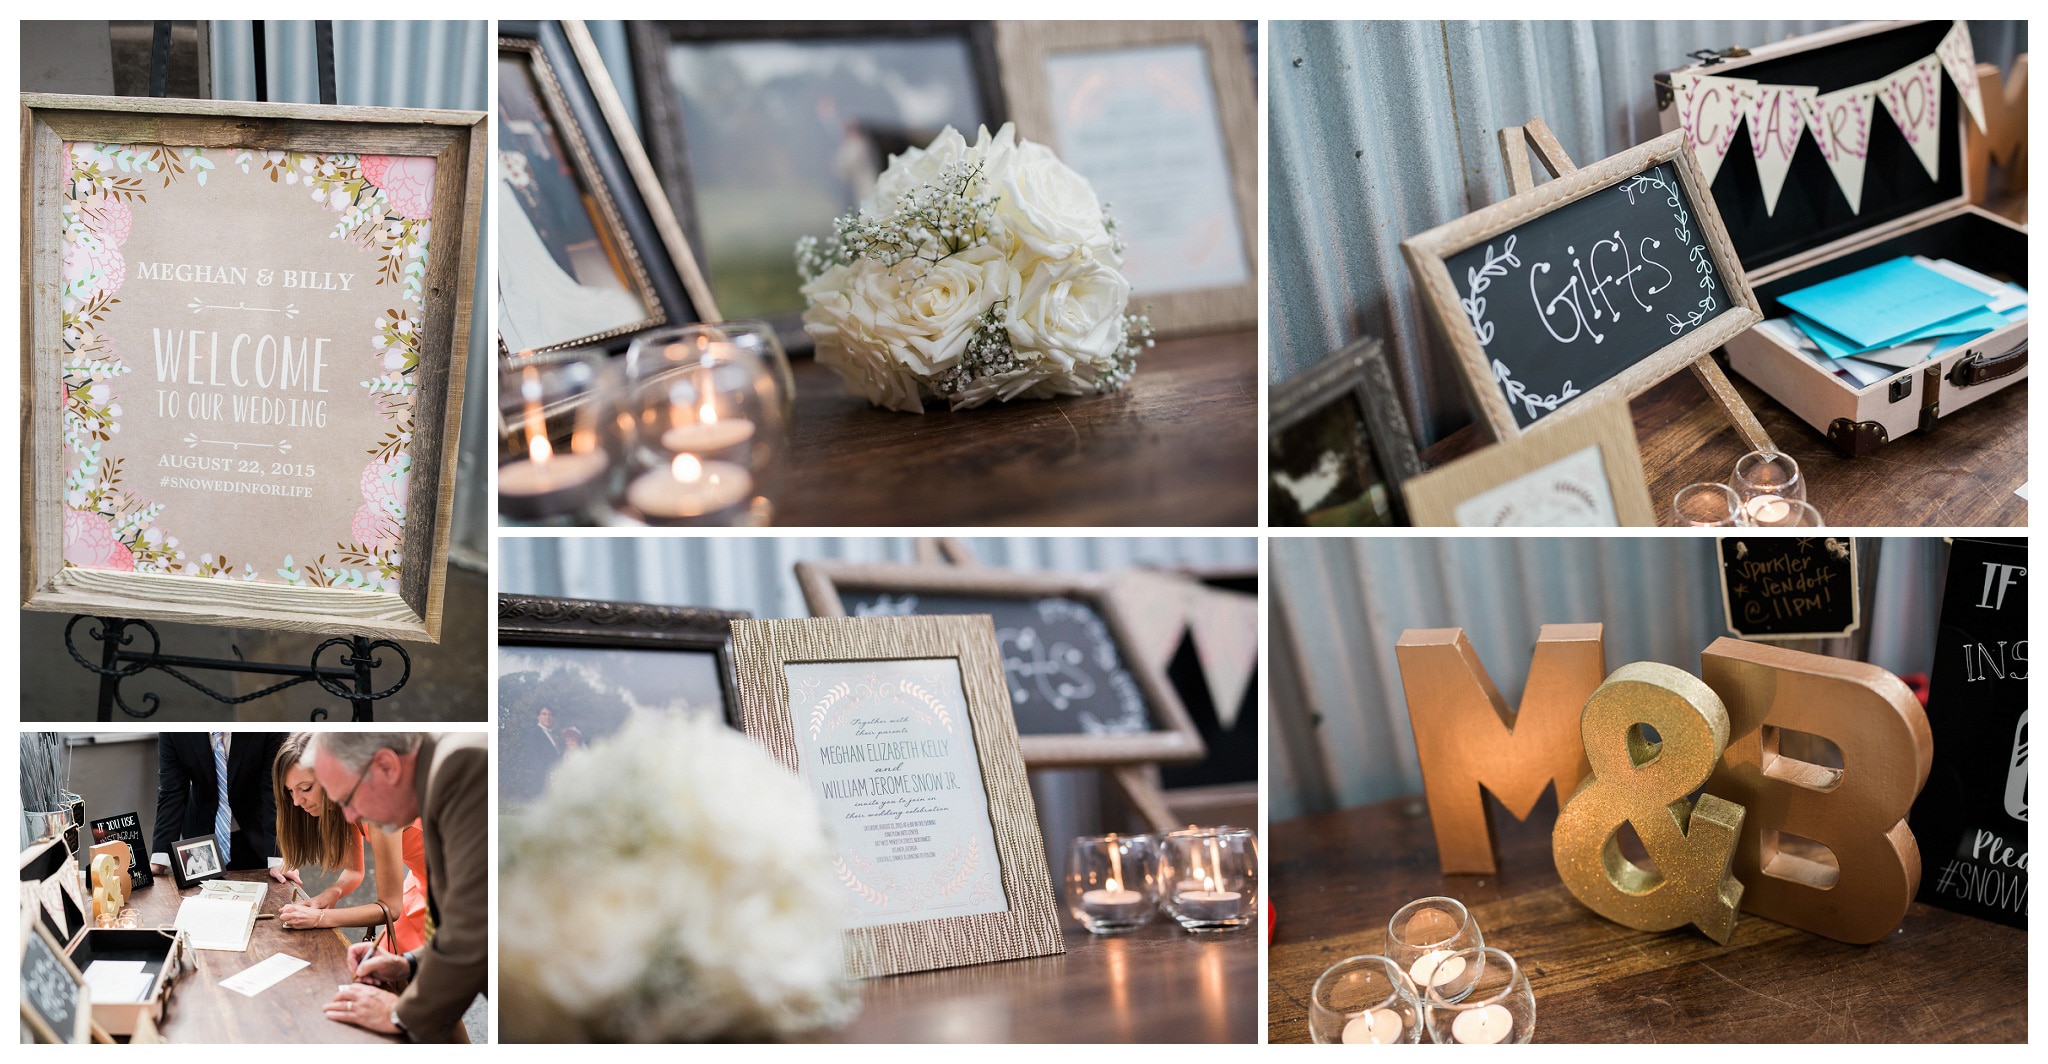 It's the little things - Picture frames and guestbooks other decor items -  Venue and Catering – King plow Event Gallery and Bold American Events Decor and flowers – Stylish Stems Music and Band – Seven Sharp Nine Transportation – Georgia Trolley Photographer One Life Photography